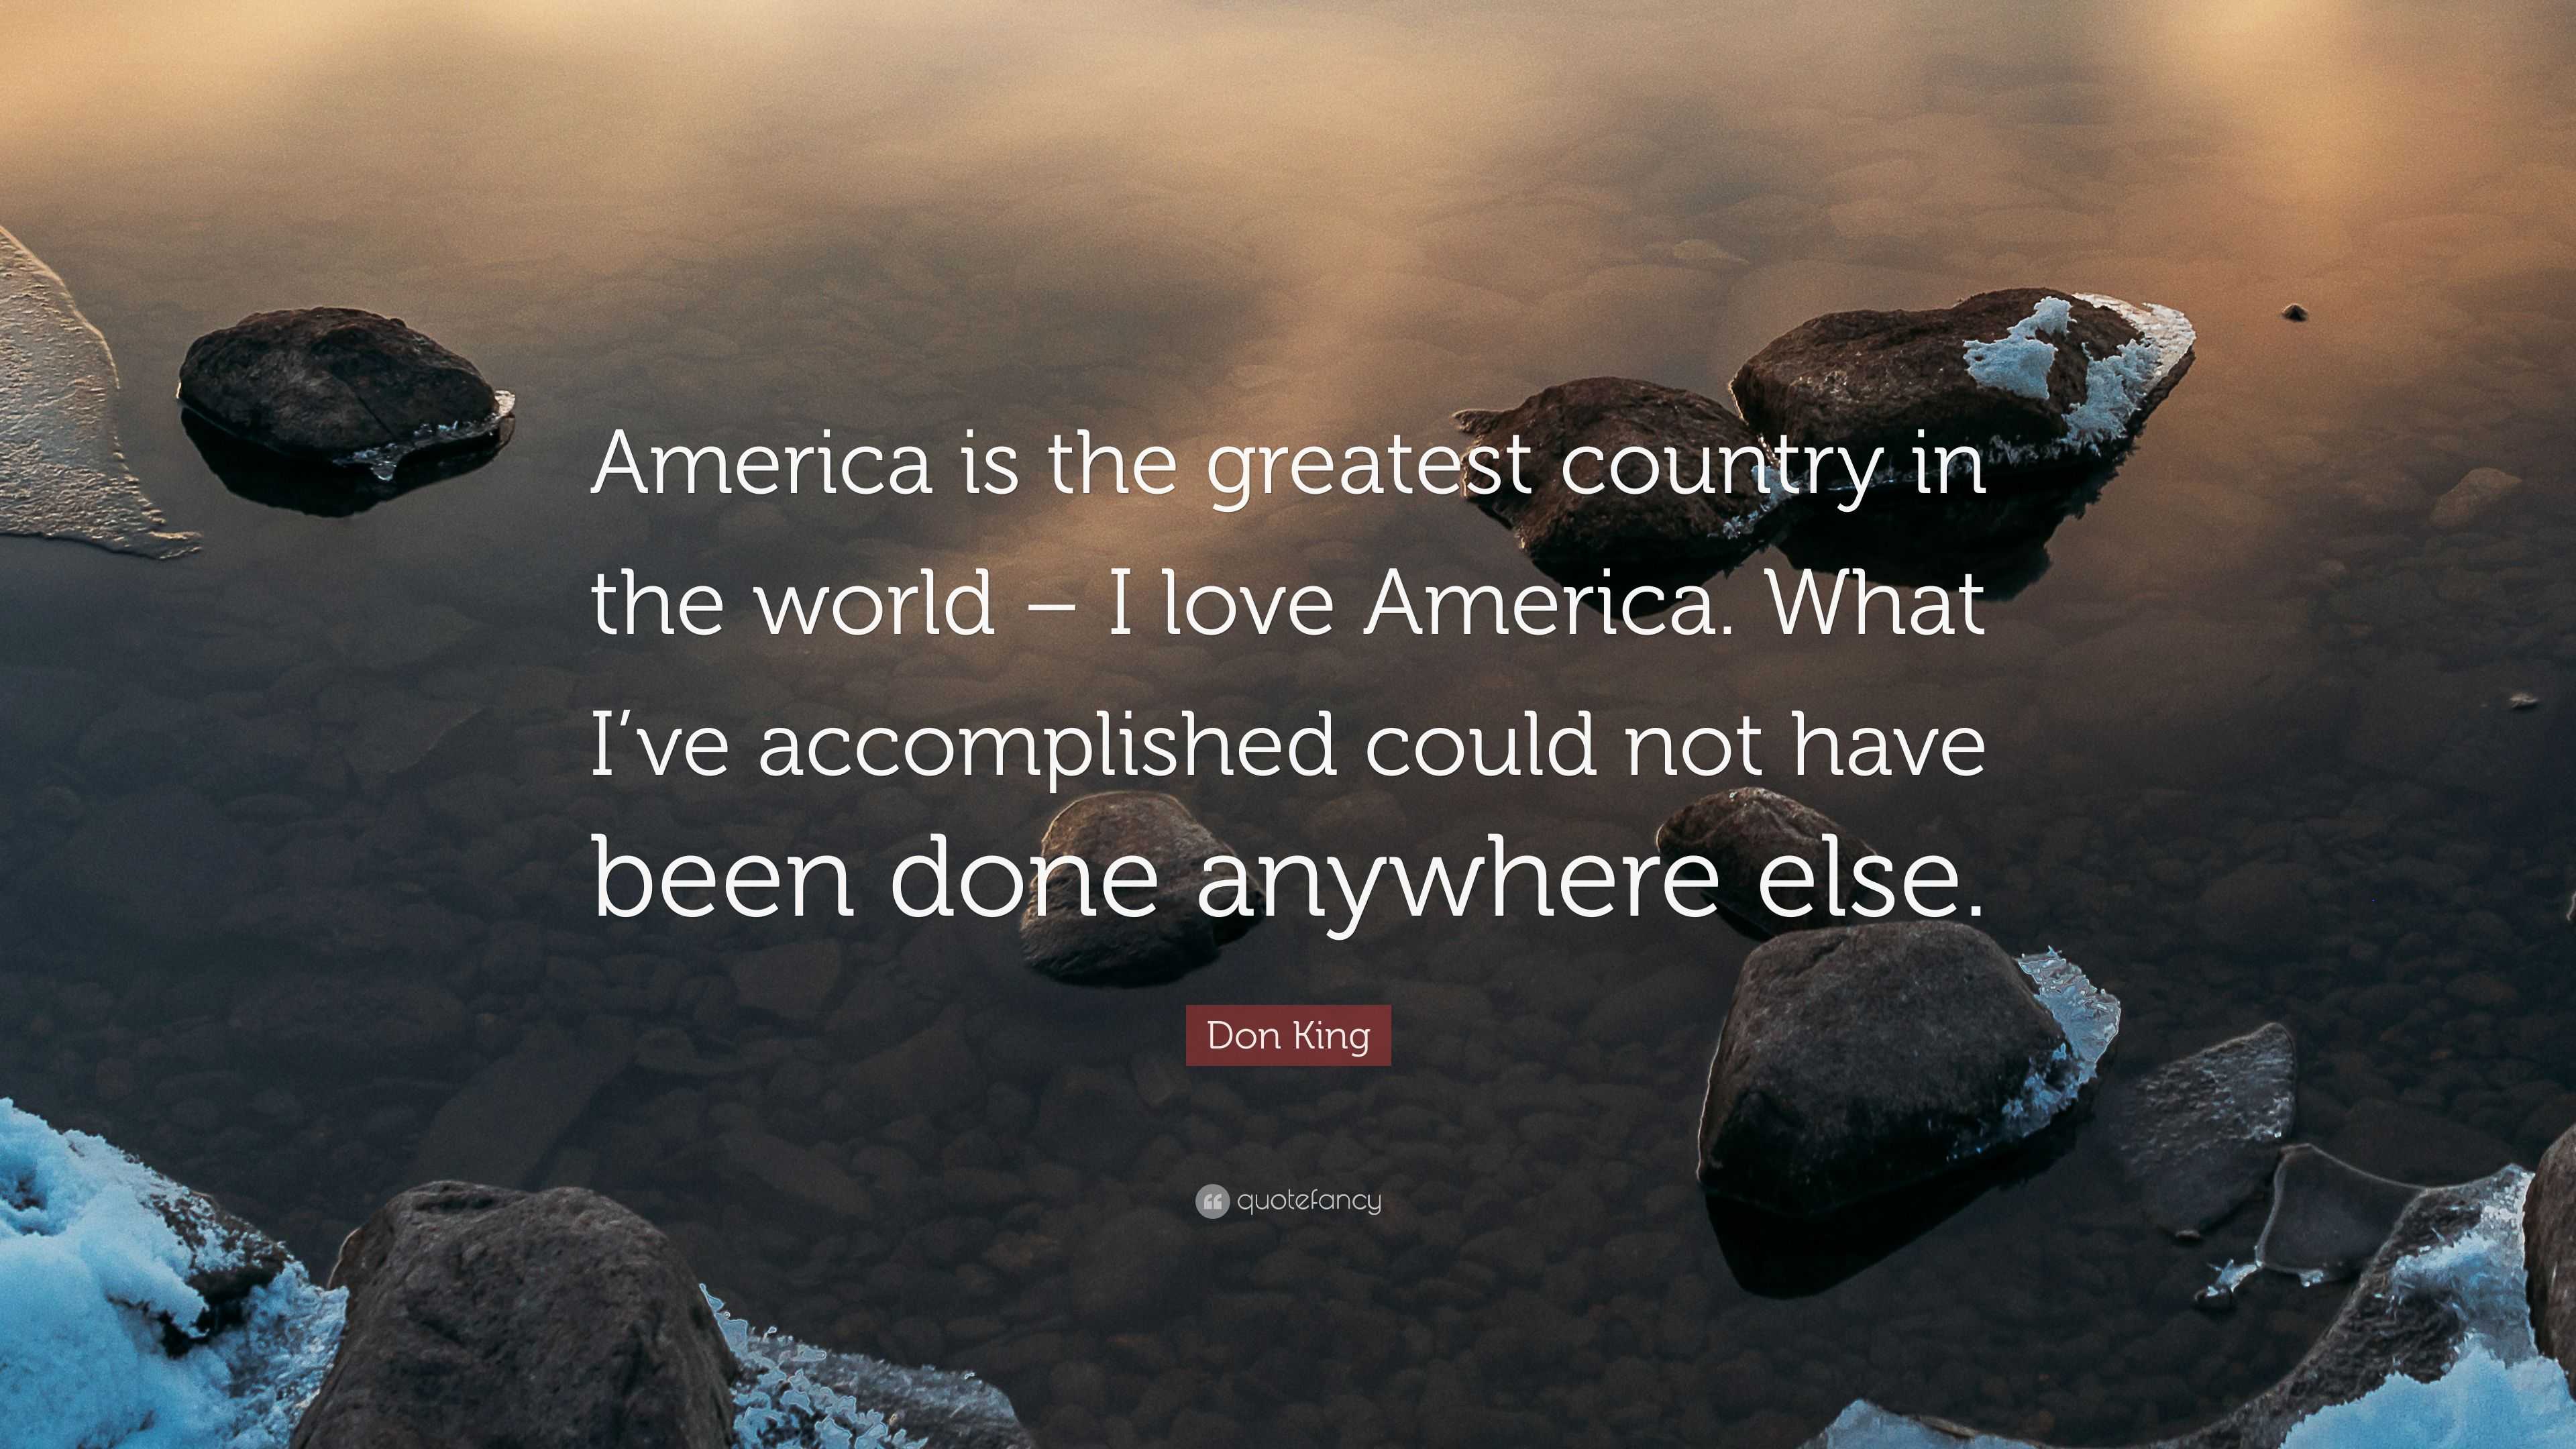 Don King Quote: “America is the greatest country in the world – I love  America. What I've accomplished could not have been done anywhere ”